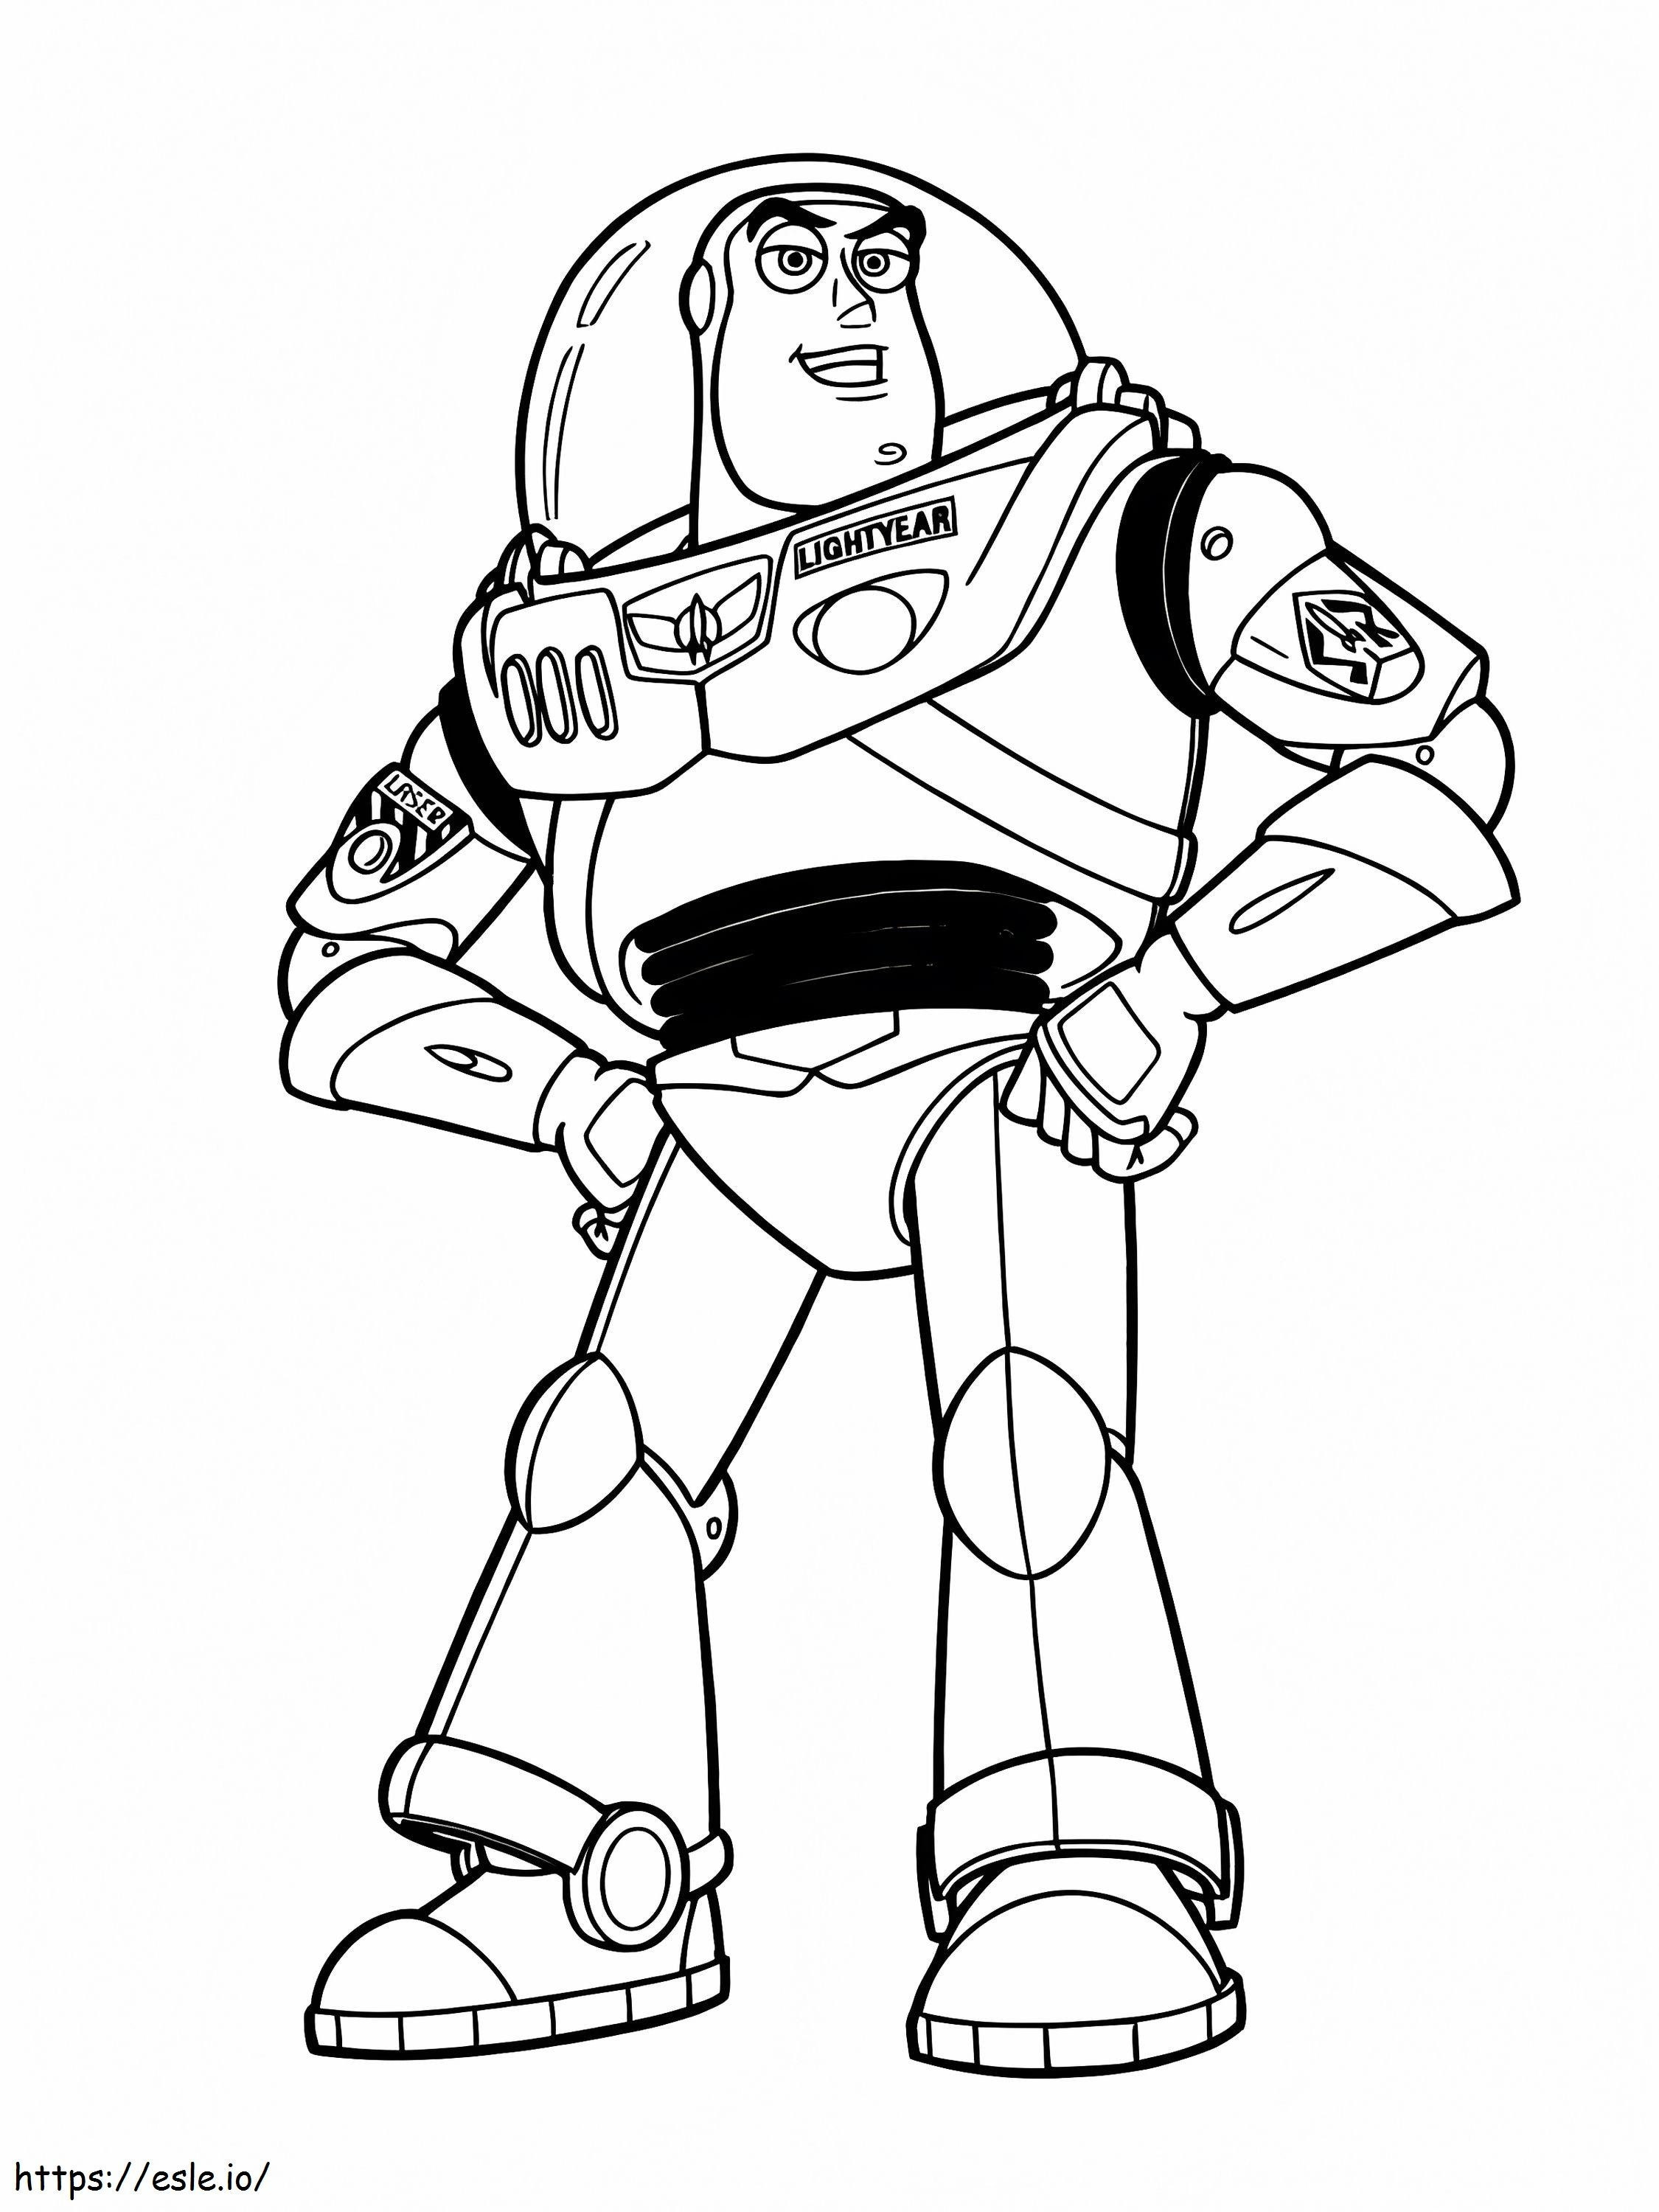 Diversion Buzz Lightyear coloring page